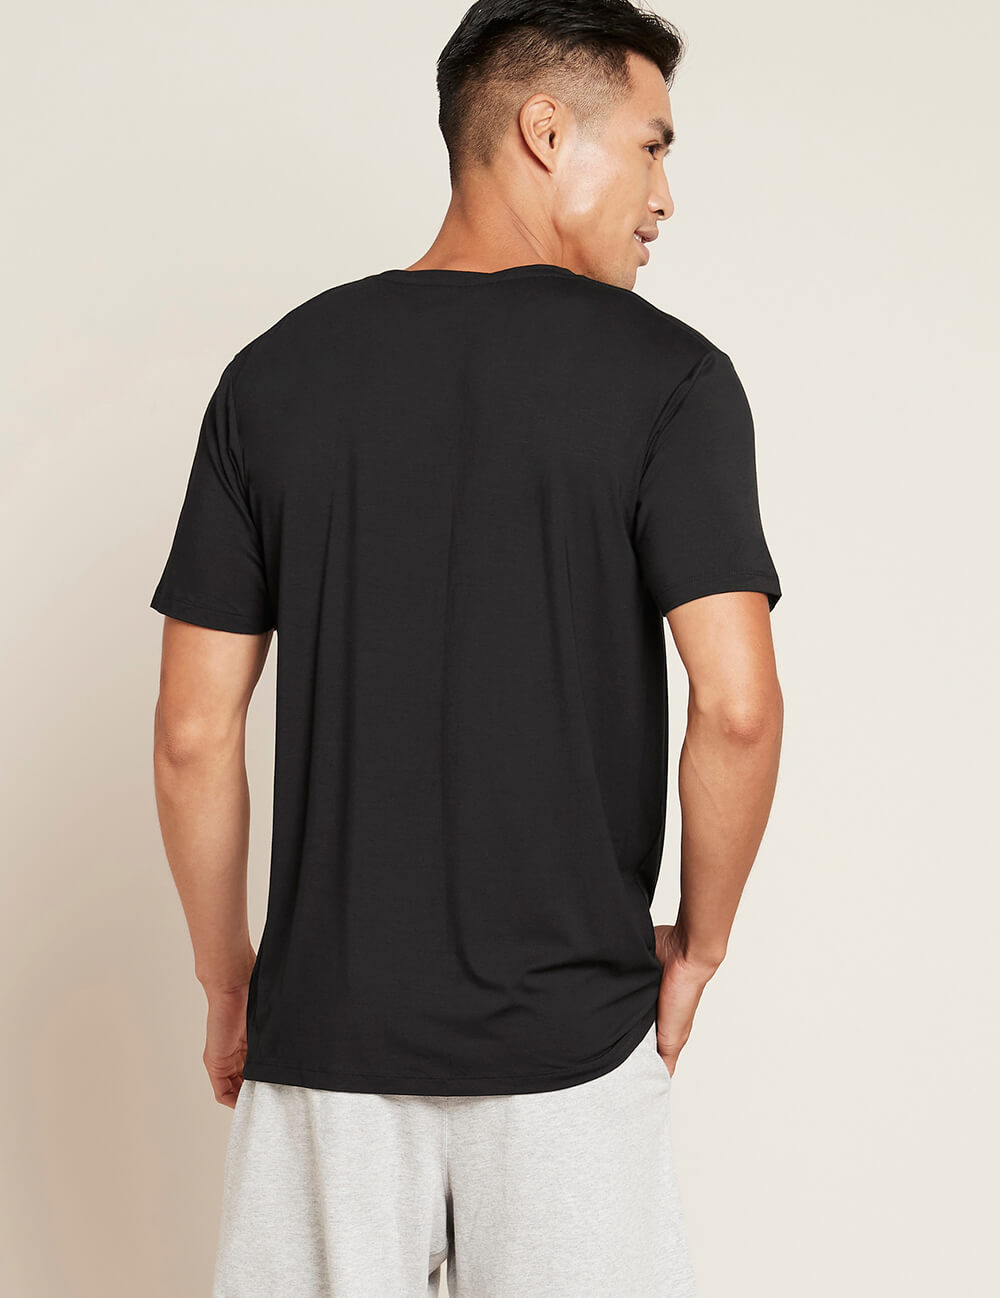 Boody Bamboo Men's Crew Neck T-Shirt in Black Back View